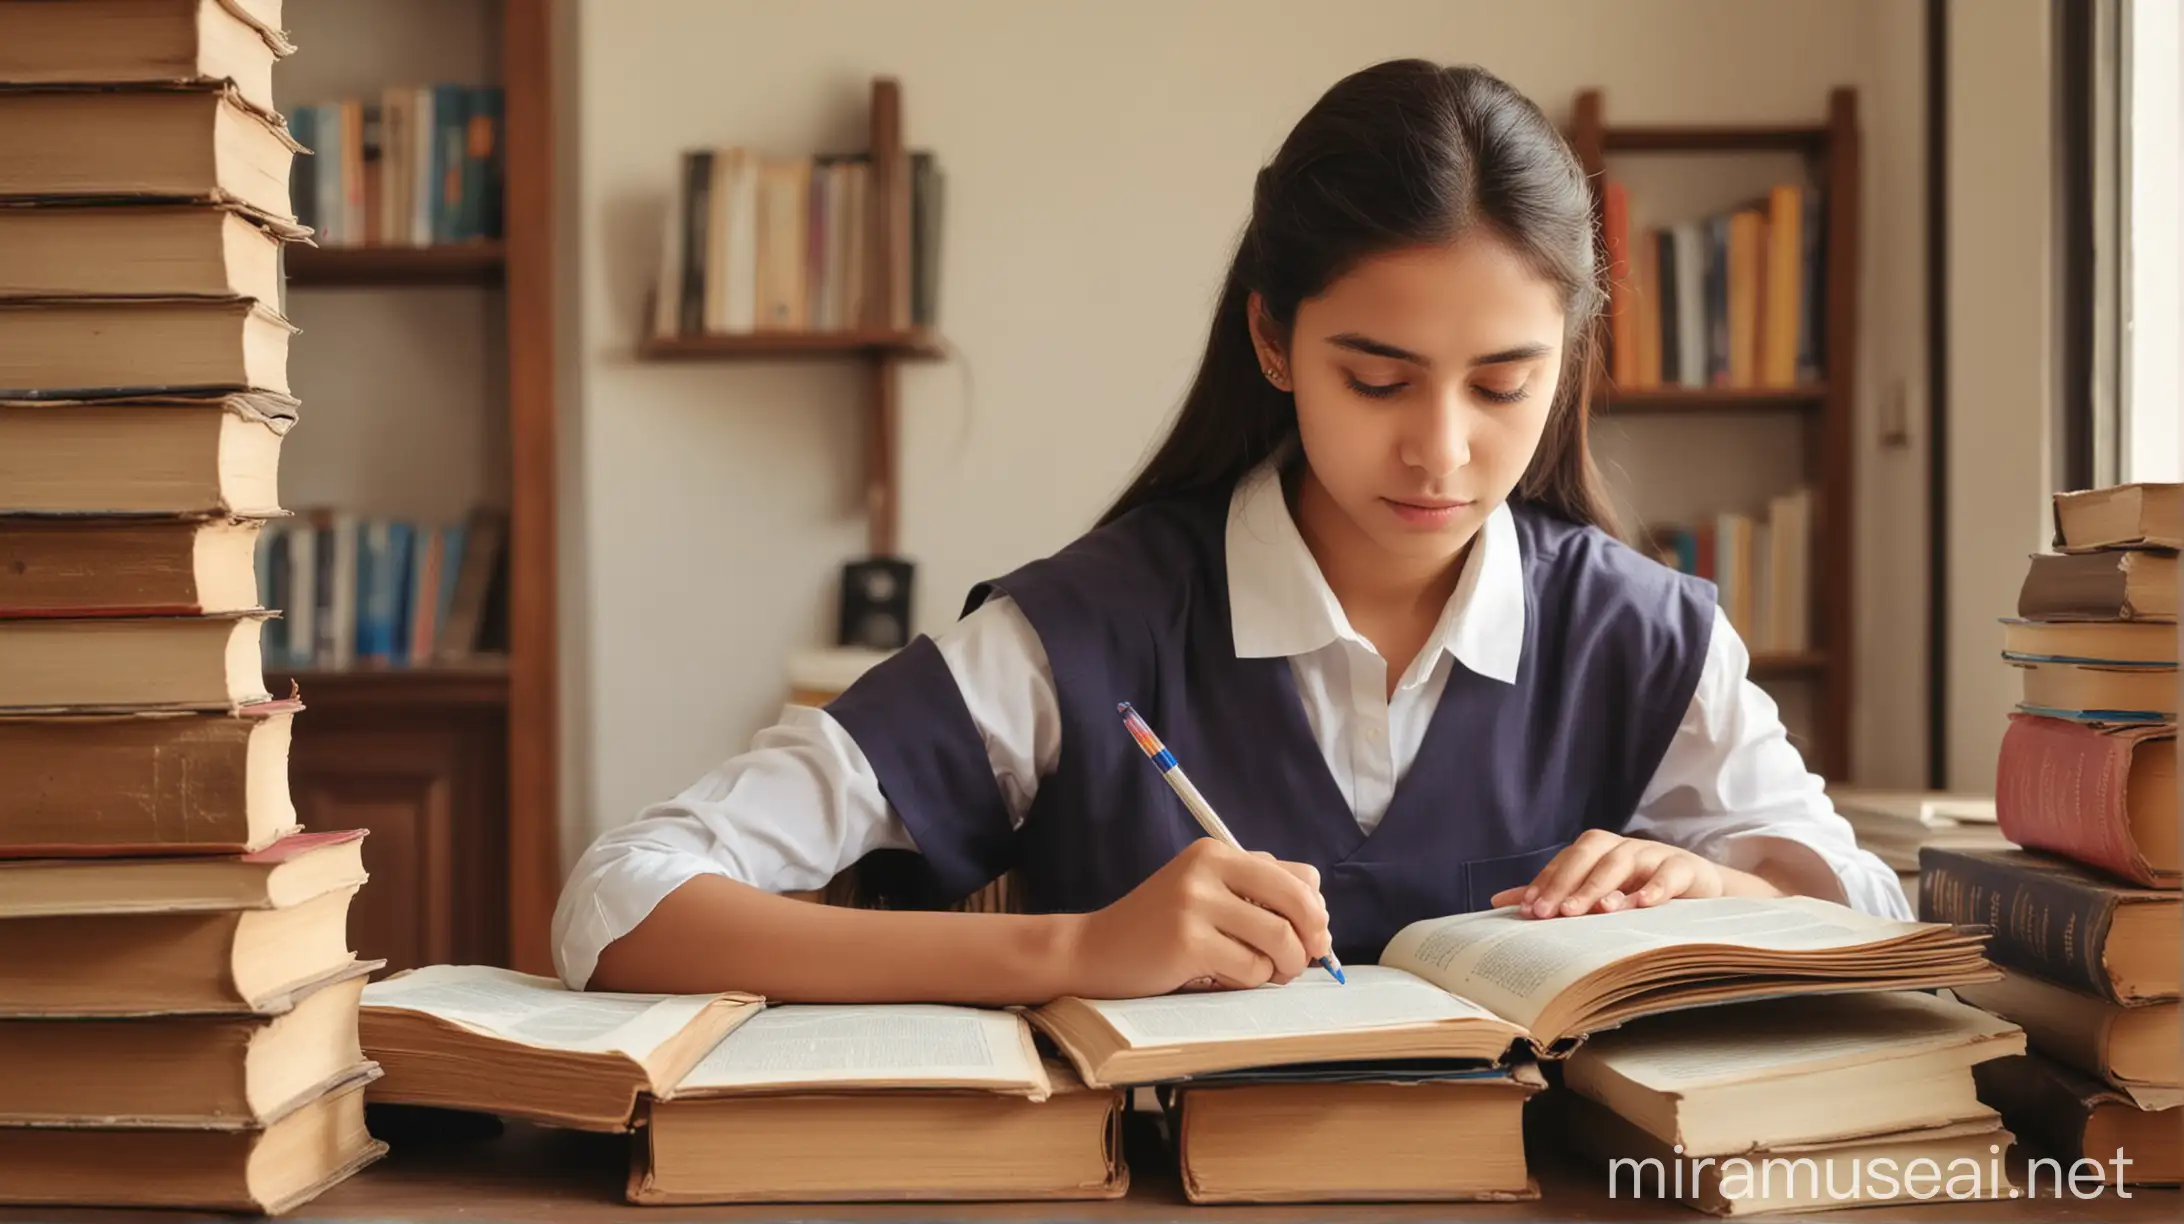 Girl student working hard with books for her exams, her marriage being forced by her parents; and she thinks her dreams of becoming a civil servant is going away